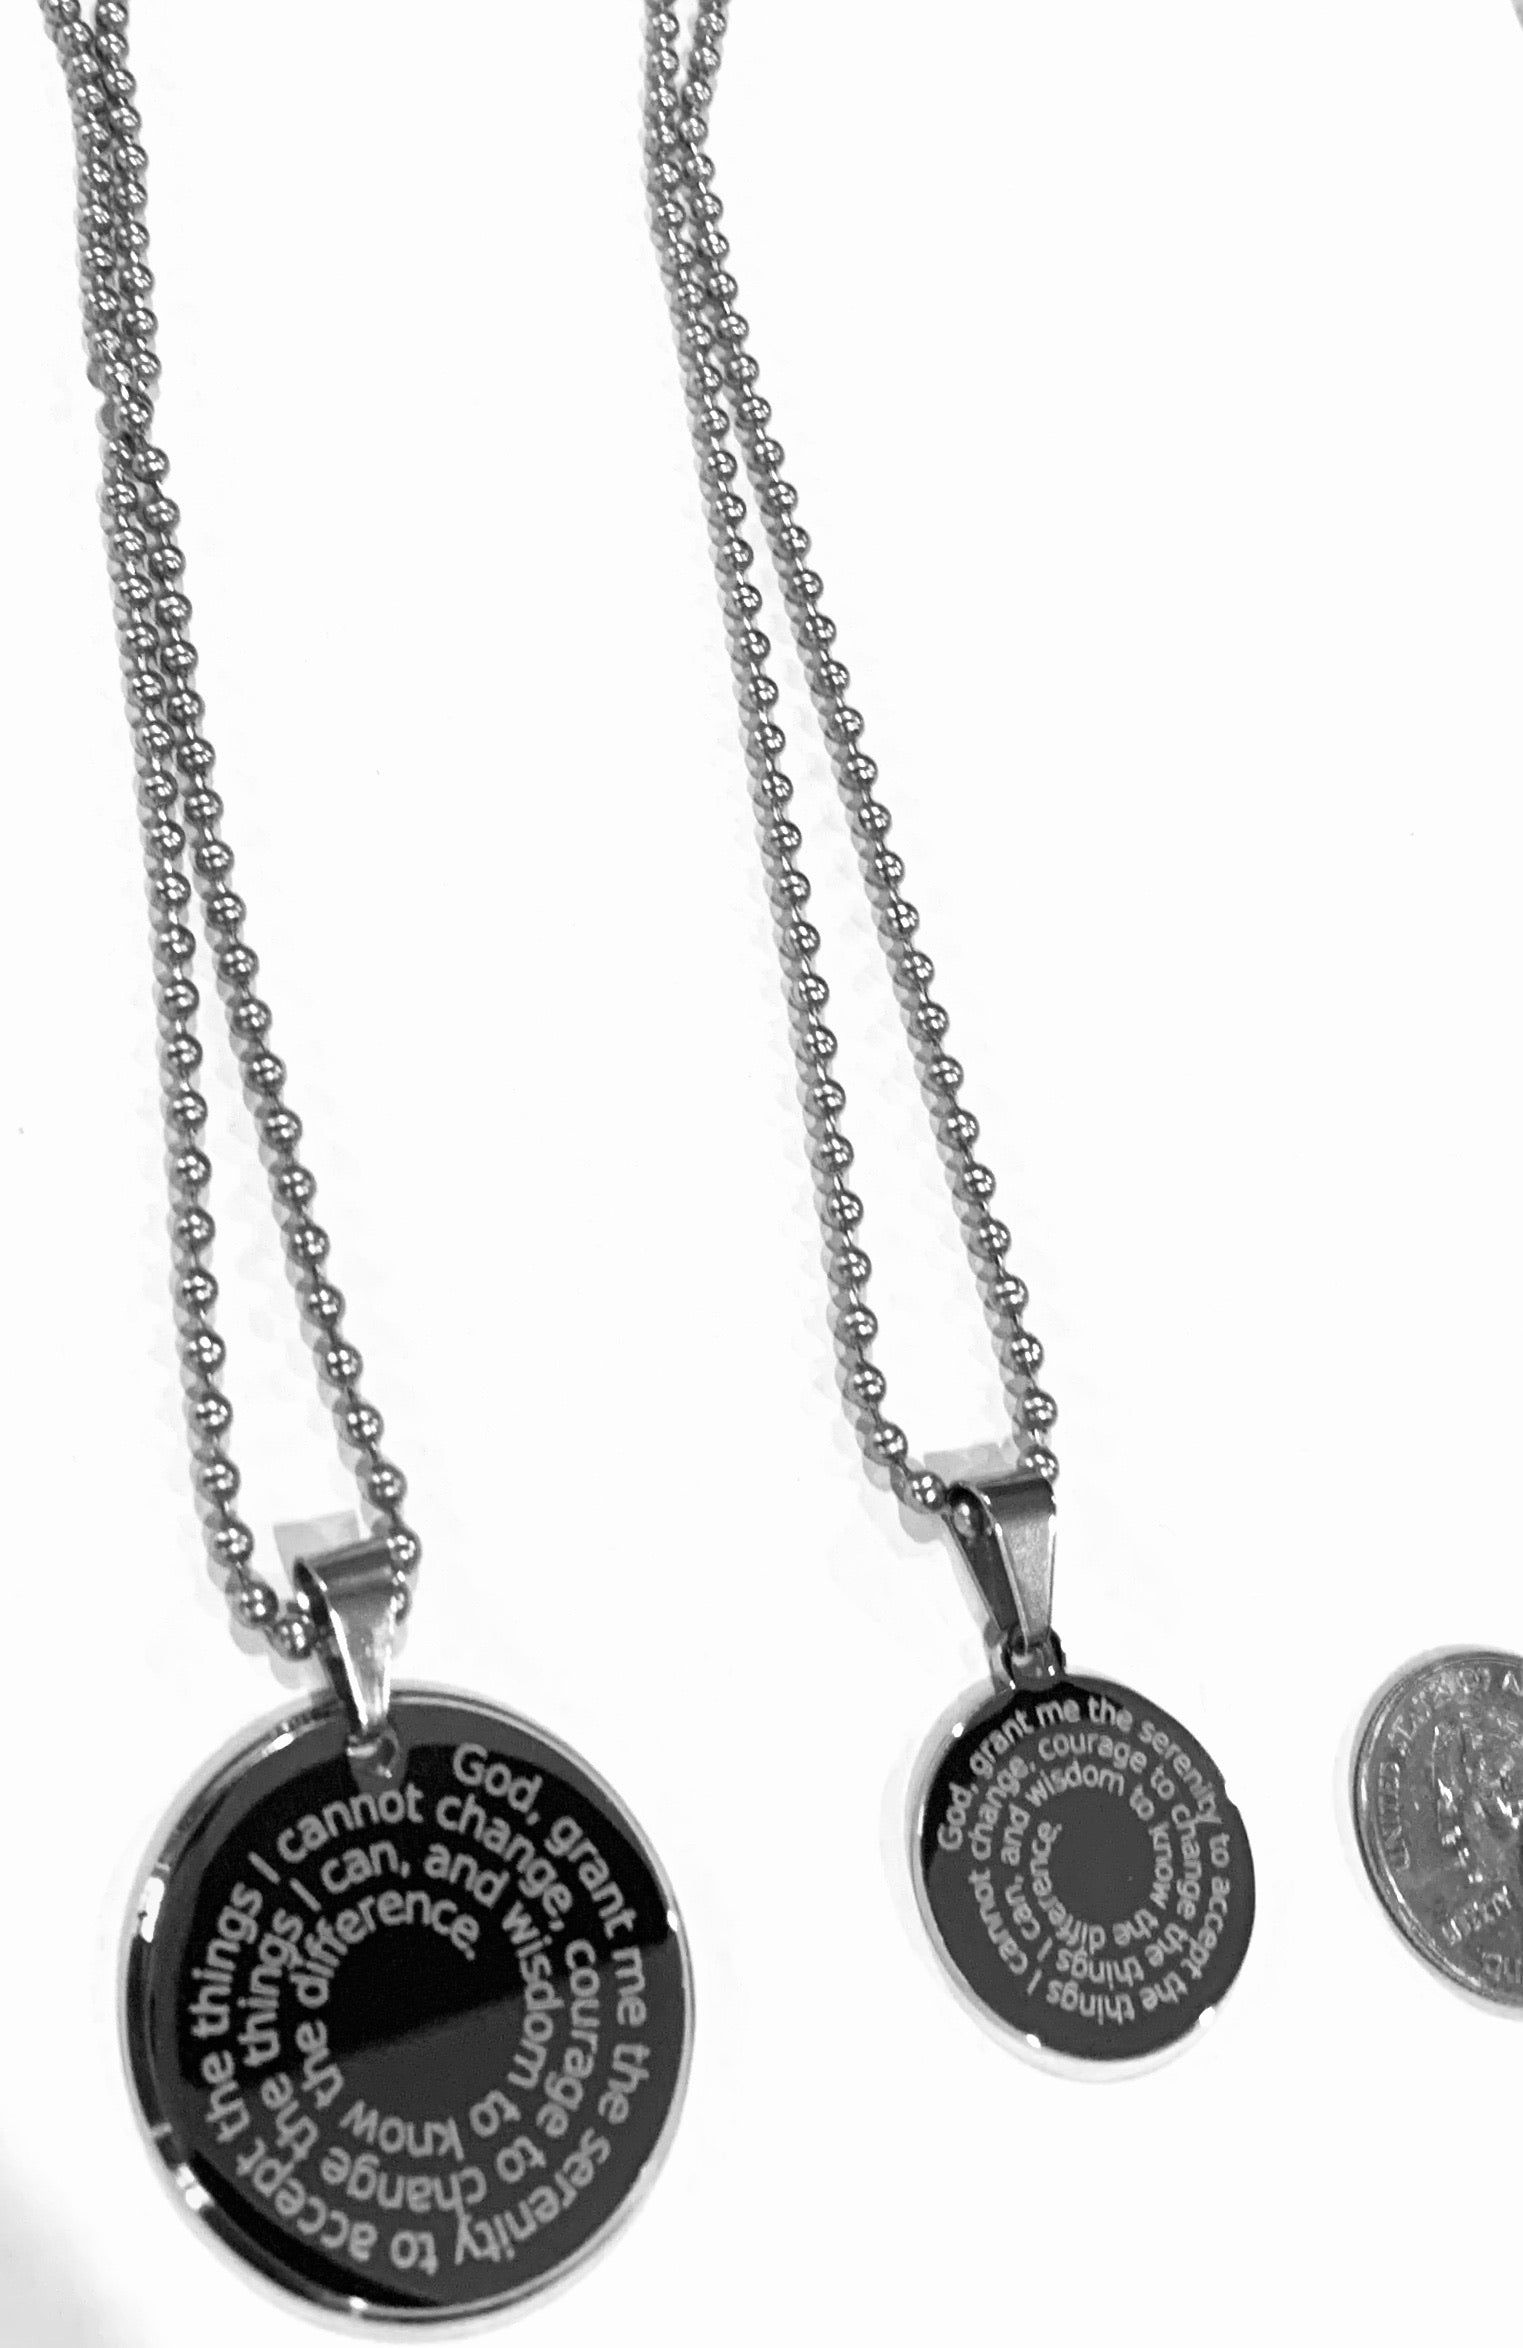 Serenity Prayer His and Hers Pendant Necklaces - Samstagsandmore